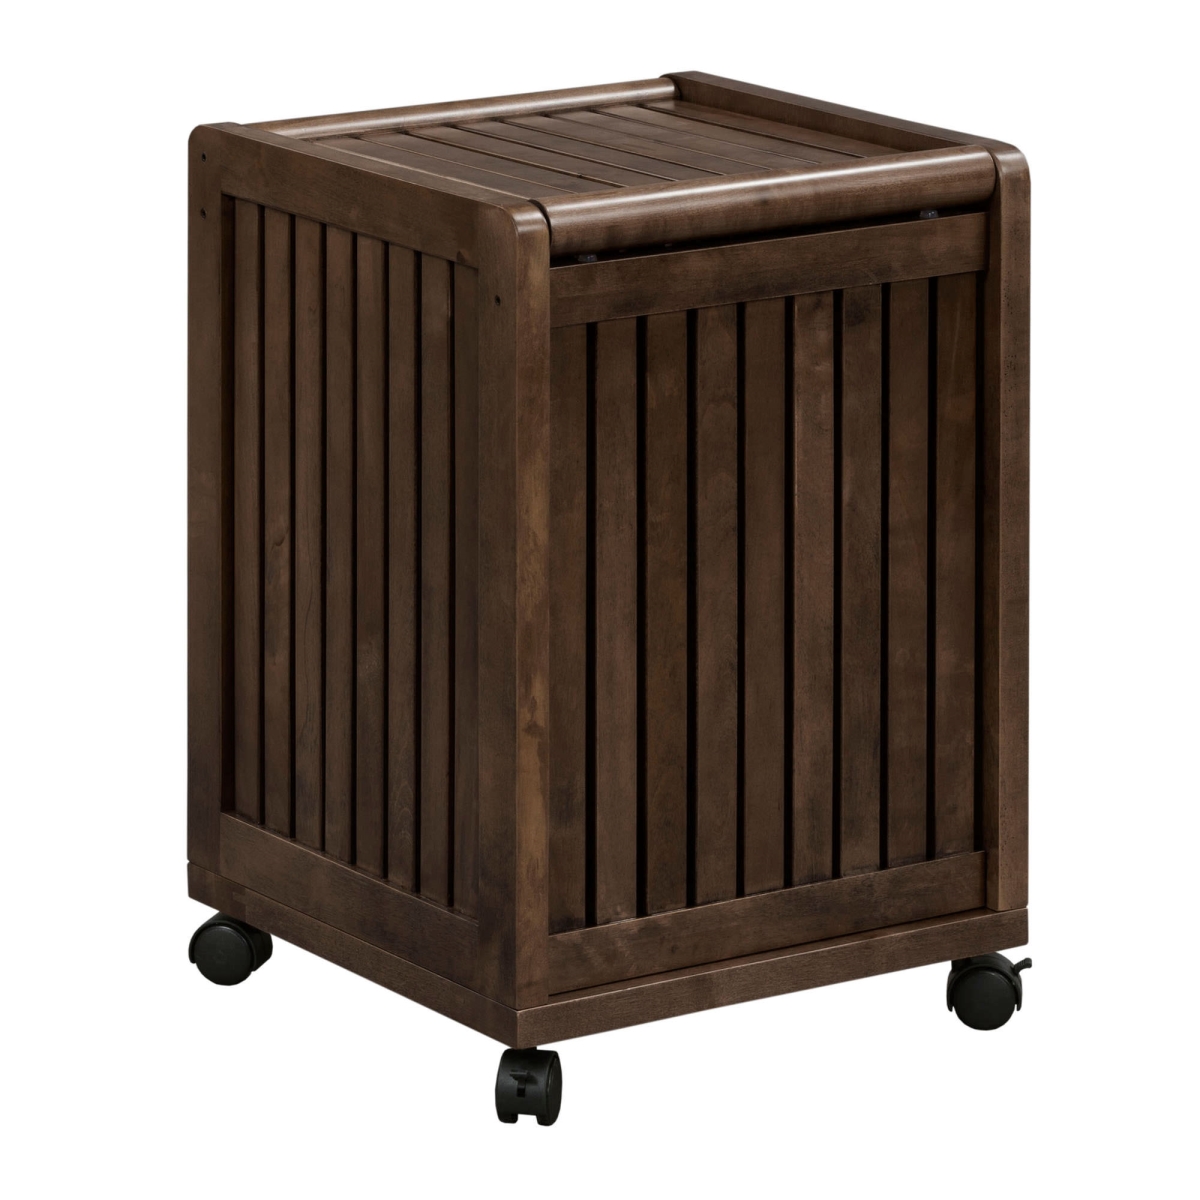 2214-esp Home Solid Wood Abingdon Mobile Rolling Multiple Colors Laundry Hamper With Lid